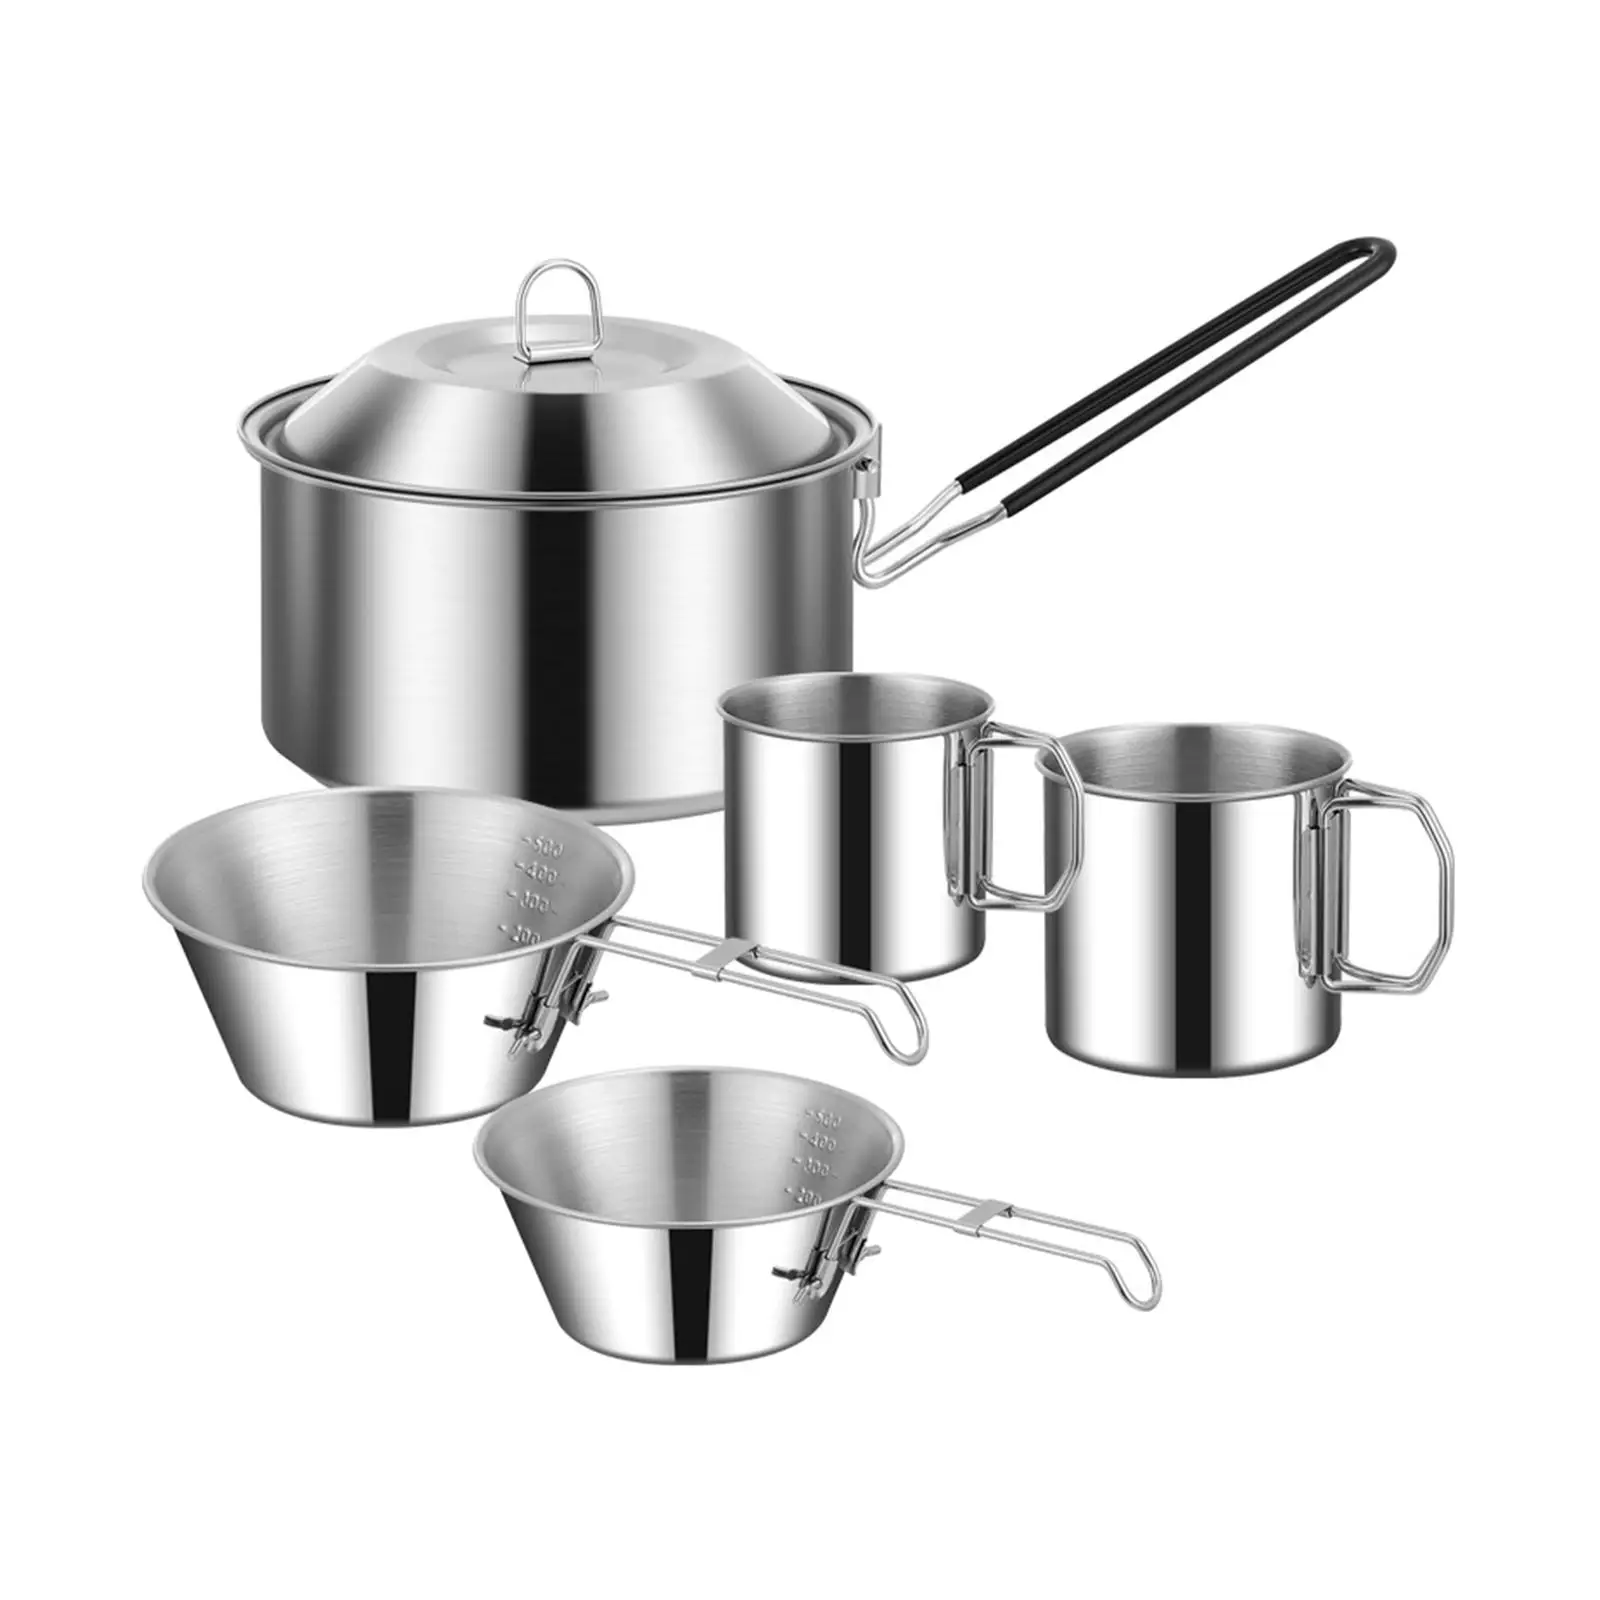 Stainless Steel Cooking Pot Camping Tableware Cookware Foldable Equipment for BBQ